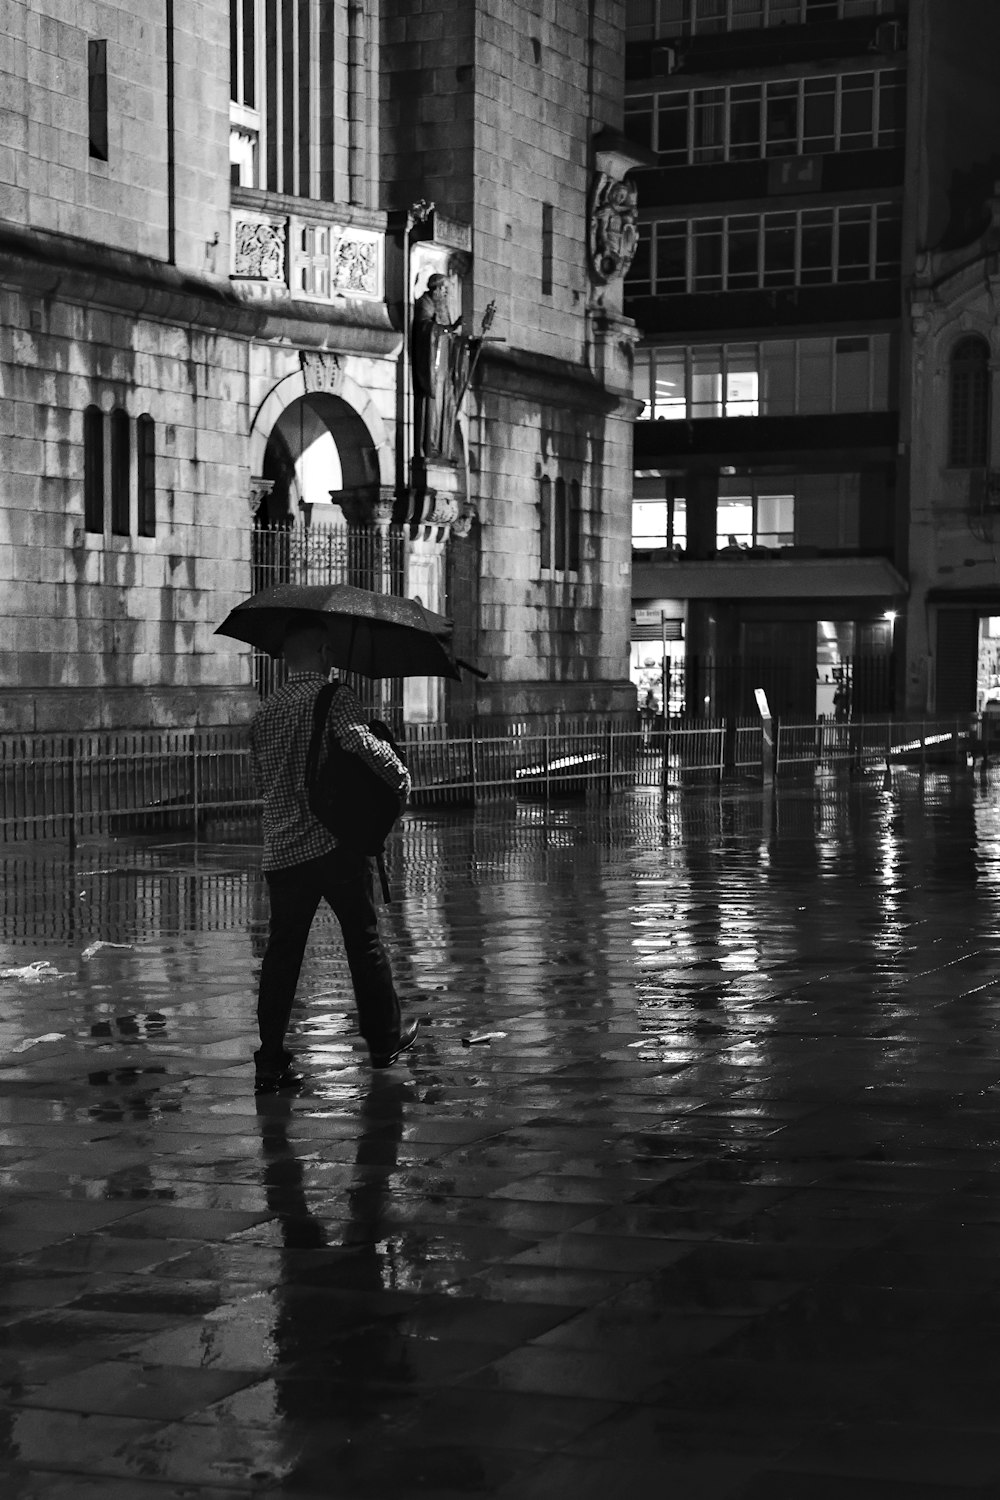 person walking and using umbrella near buildings